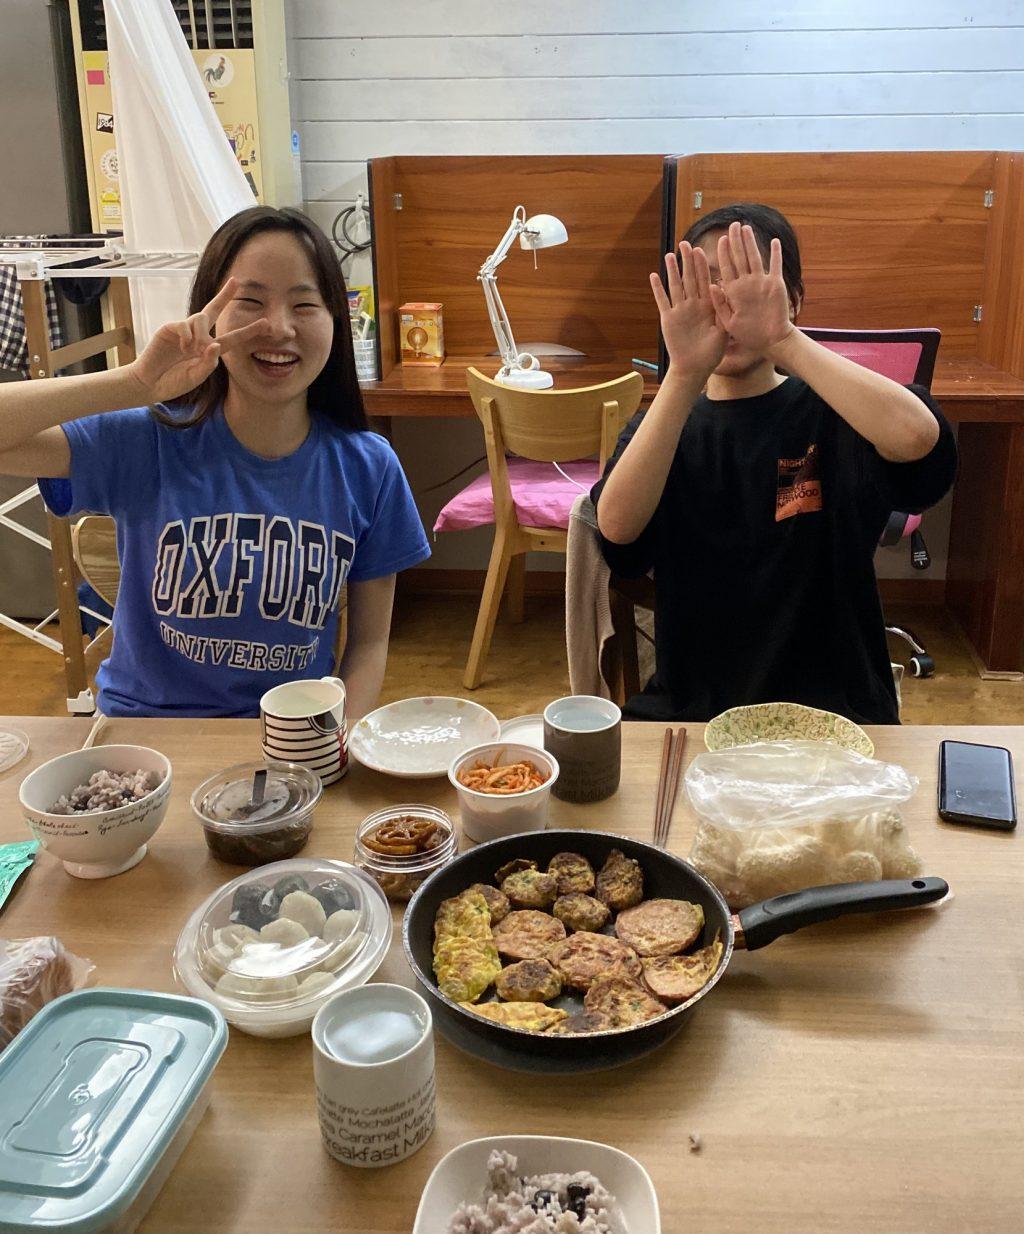 My two housemates and I share a Chuseok meal with Korean food and traditional rice cakes at our share house over the Chuseok holiday Oct 2. Our meal carried on for over two hours and was filled with an exchange of personal stories and cultural differences.